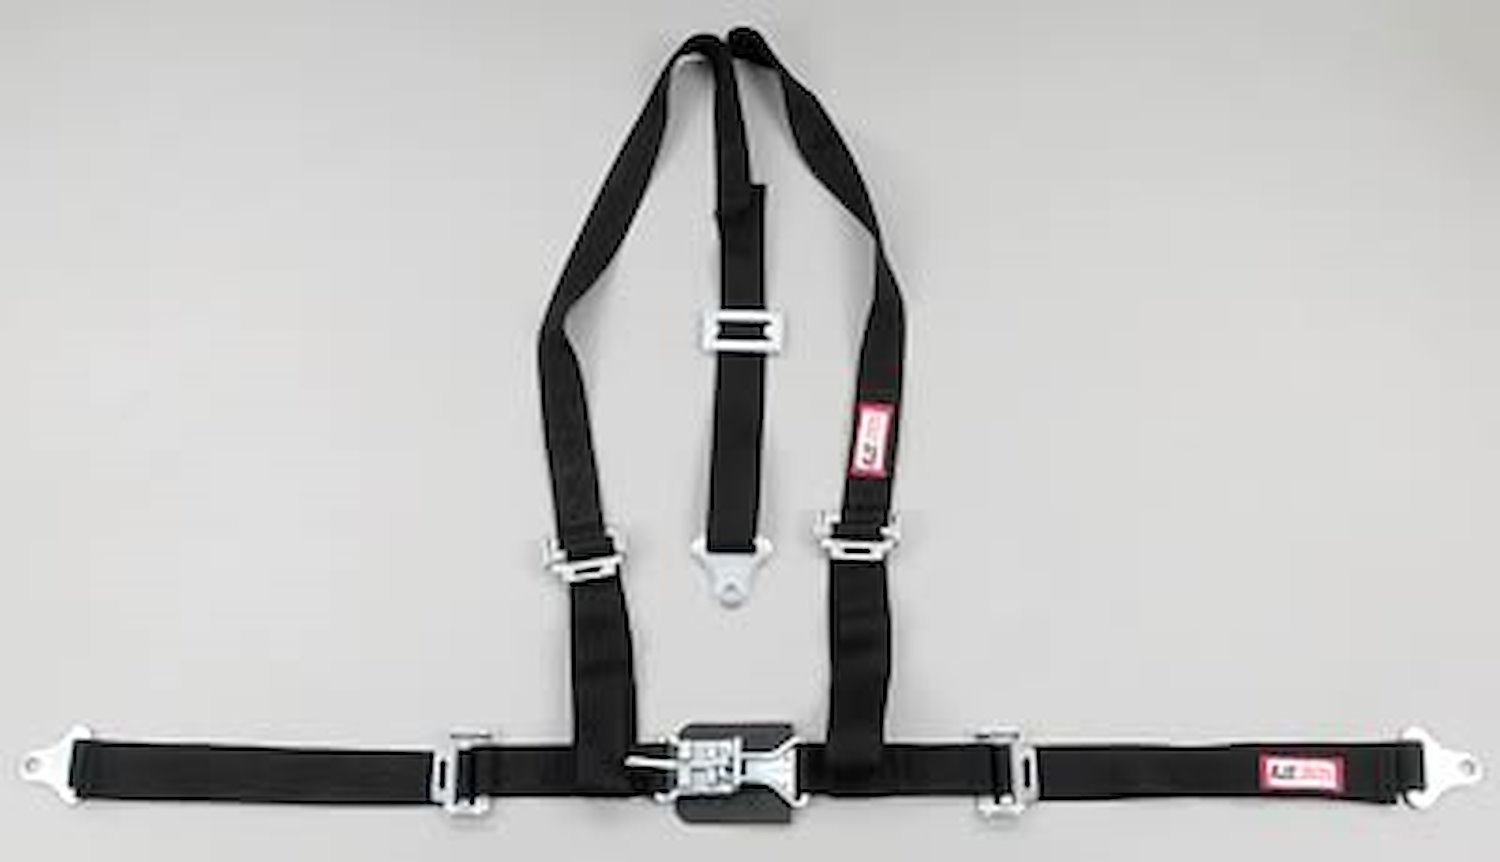 NON-SFI L&L HARNESS 3 PULL UP Lap Belt SNAP SEWN IN 2 S.H. Individual FLOOR Mount WRAP/BOLT HOT PINK